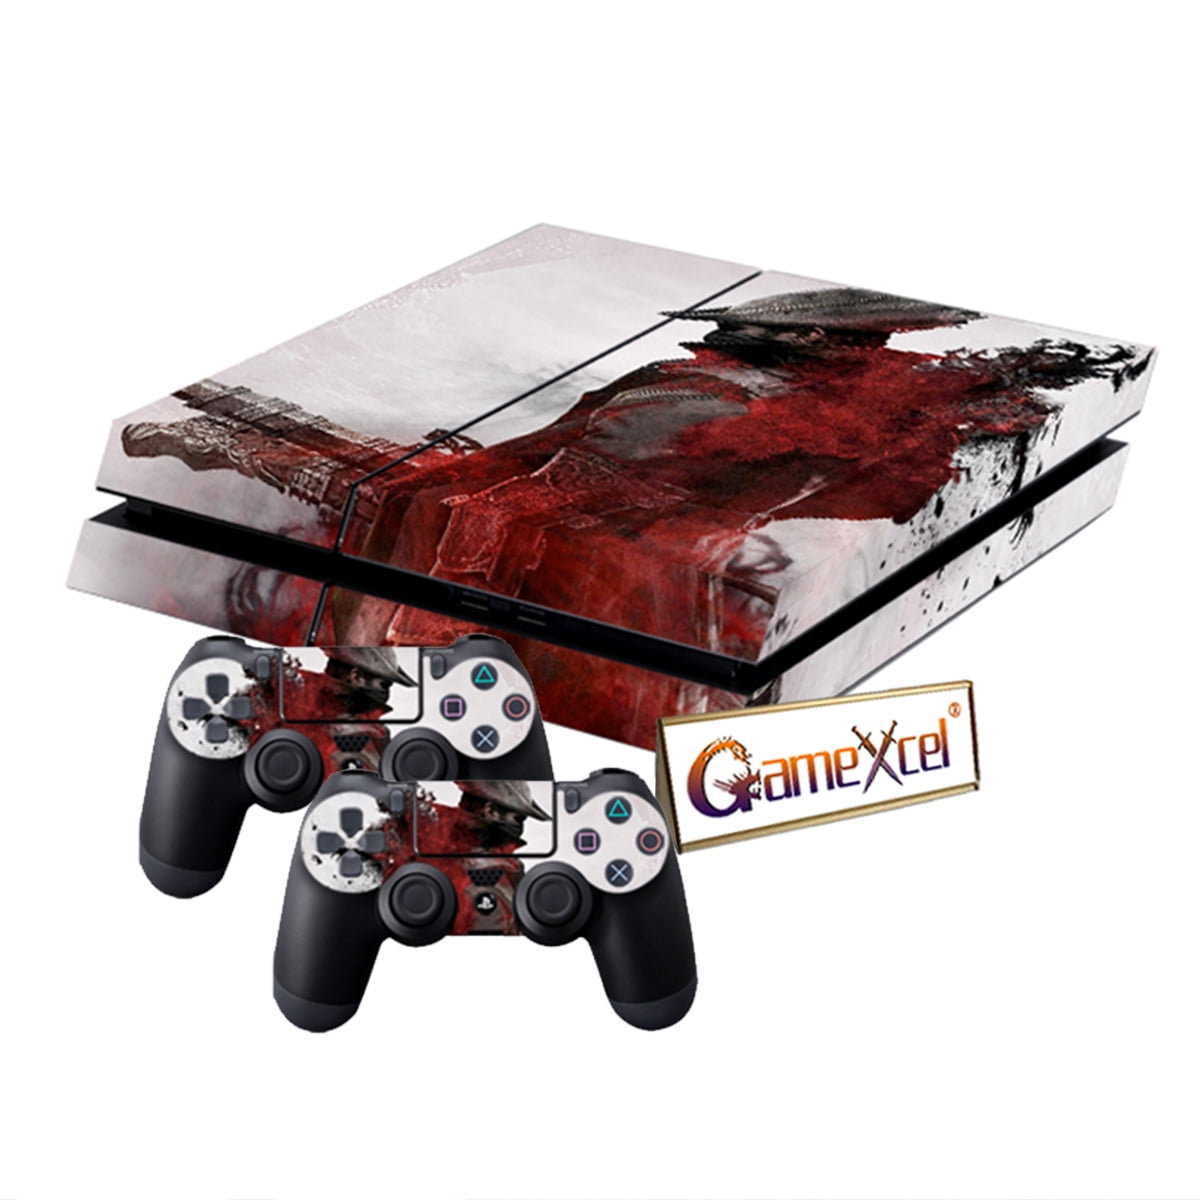 Game Dying Light PS4 Slim Skin Sticker Decal for Sony PlayStation 4 Console  and 2 Controller